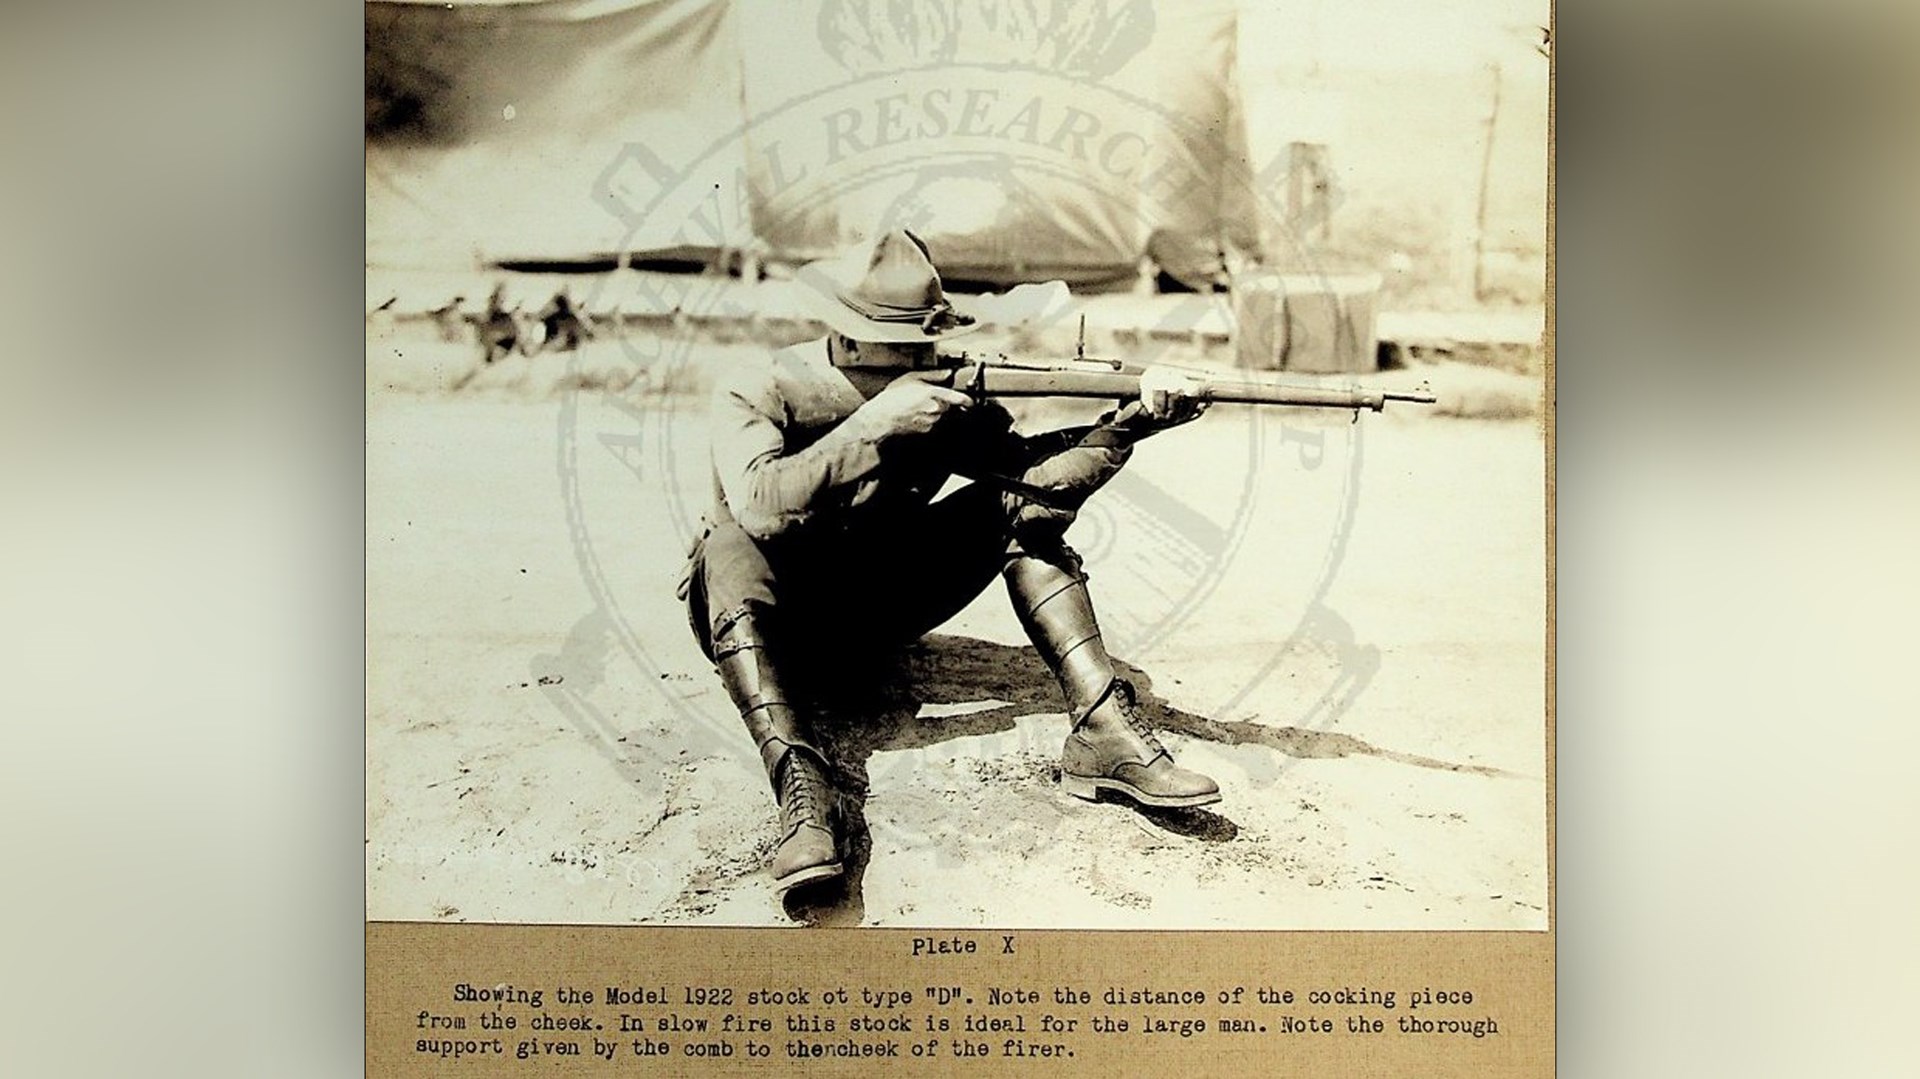 An officer using a M1922 stock. Note the lack of grasping grooves on this arsenal production stock. While “ideal for the large man” in slow fire, and providing “thorough support” to the cheek, it could be difficult to manipulate in rapid fire, especially for shorter men.